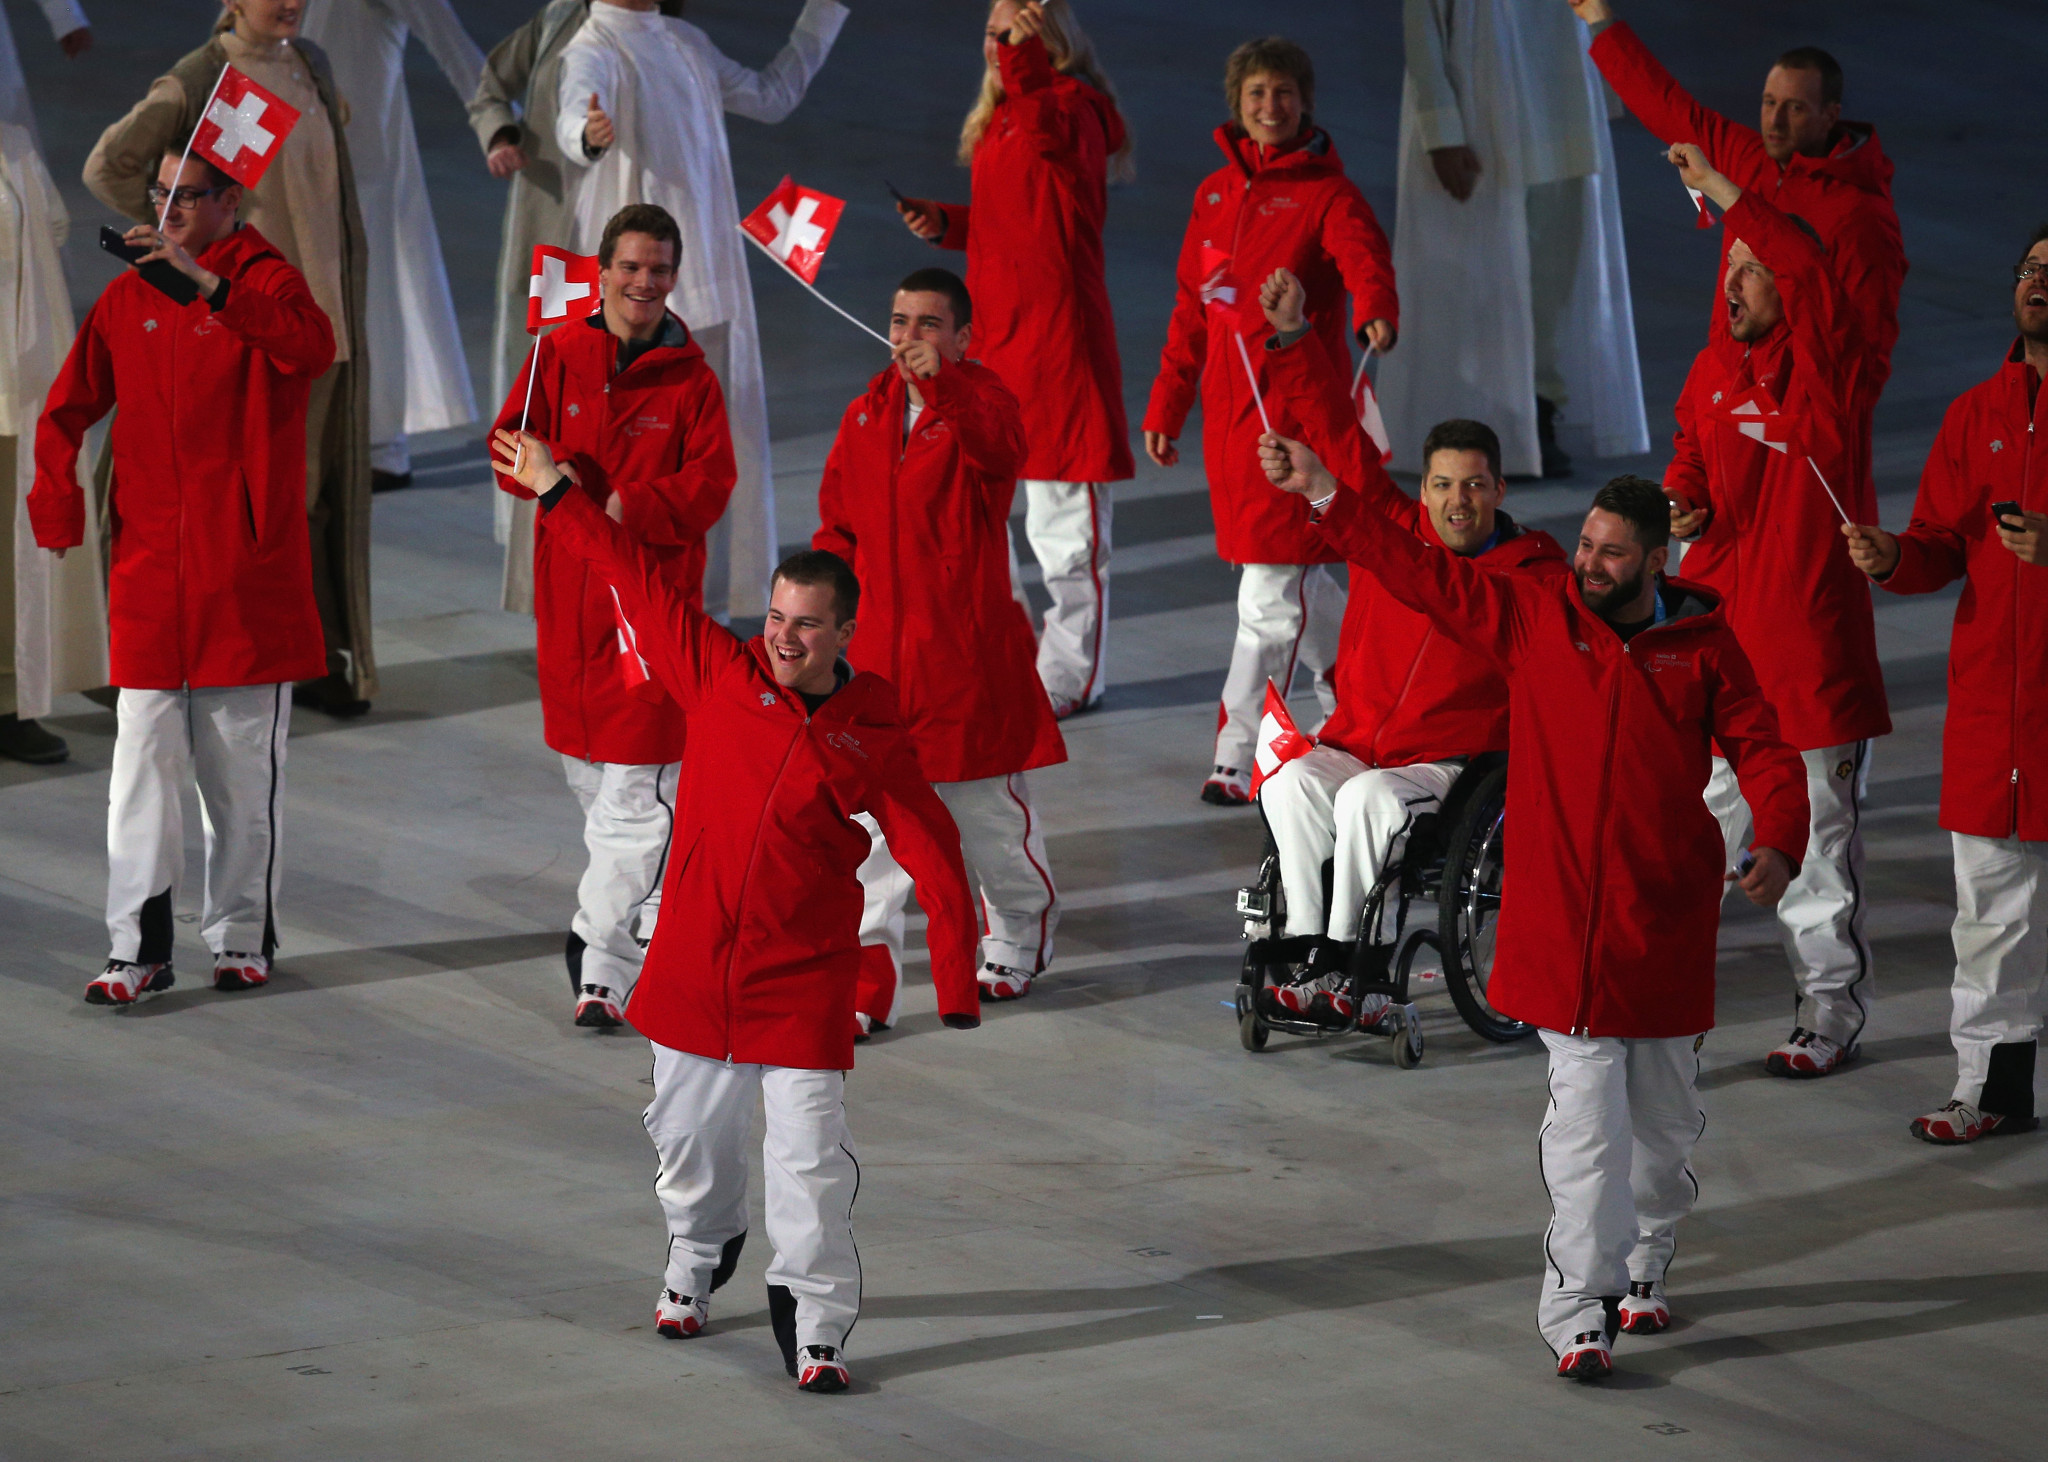 The extended sponsorships mean that Switzerland's athletes will be able to participate at the Beijing 2022 Winter Paralympic Games ©Getty Images